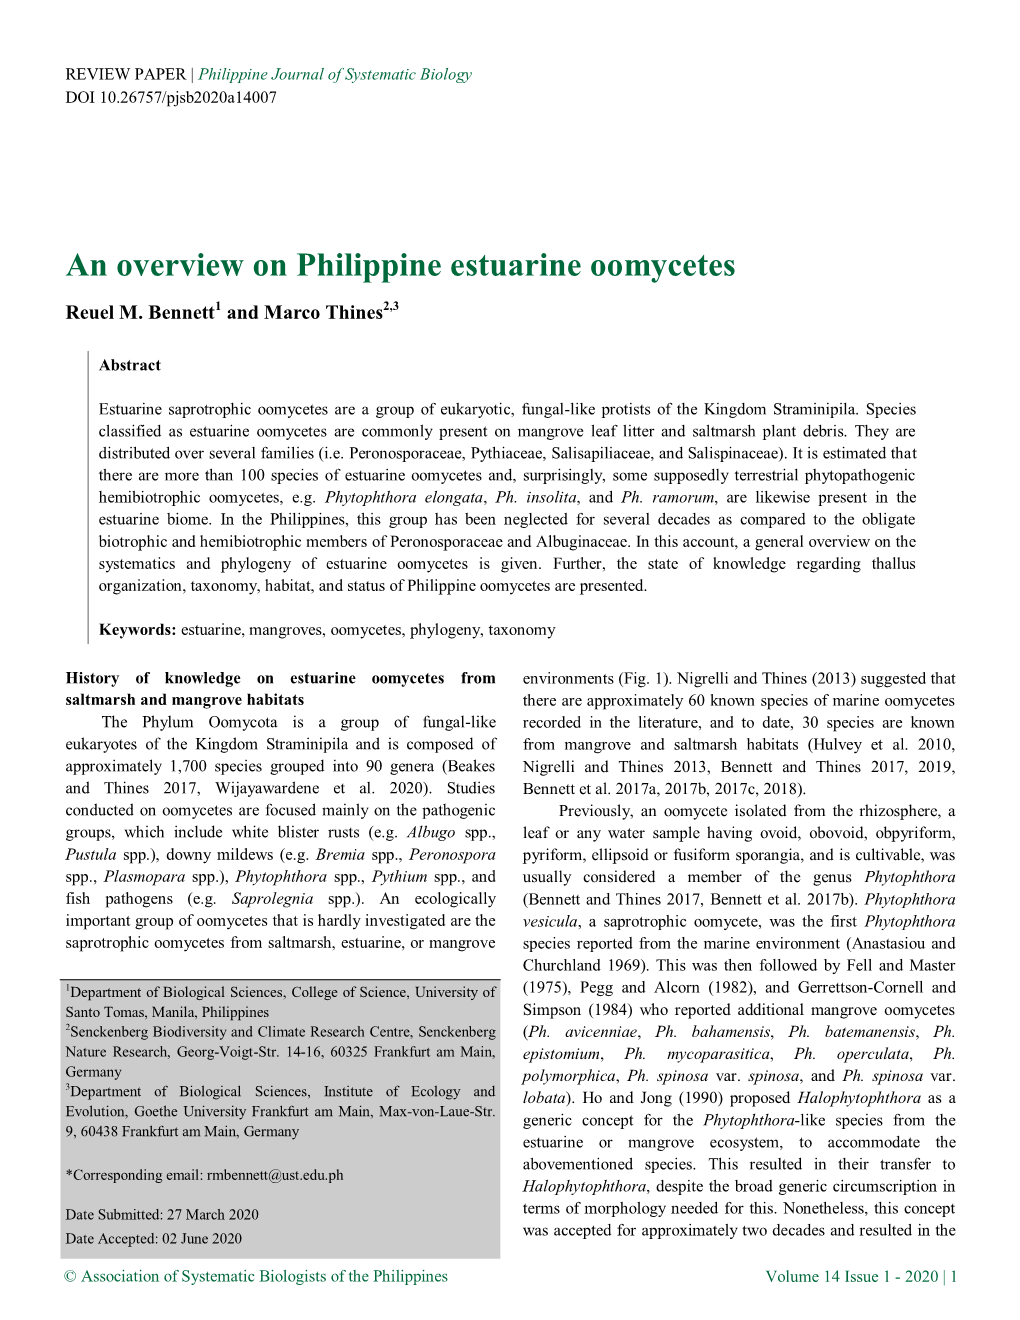 An Overview on Philippine Estuarine Oomycetes